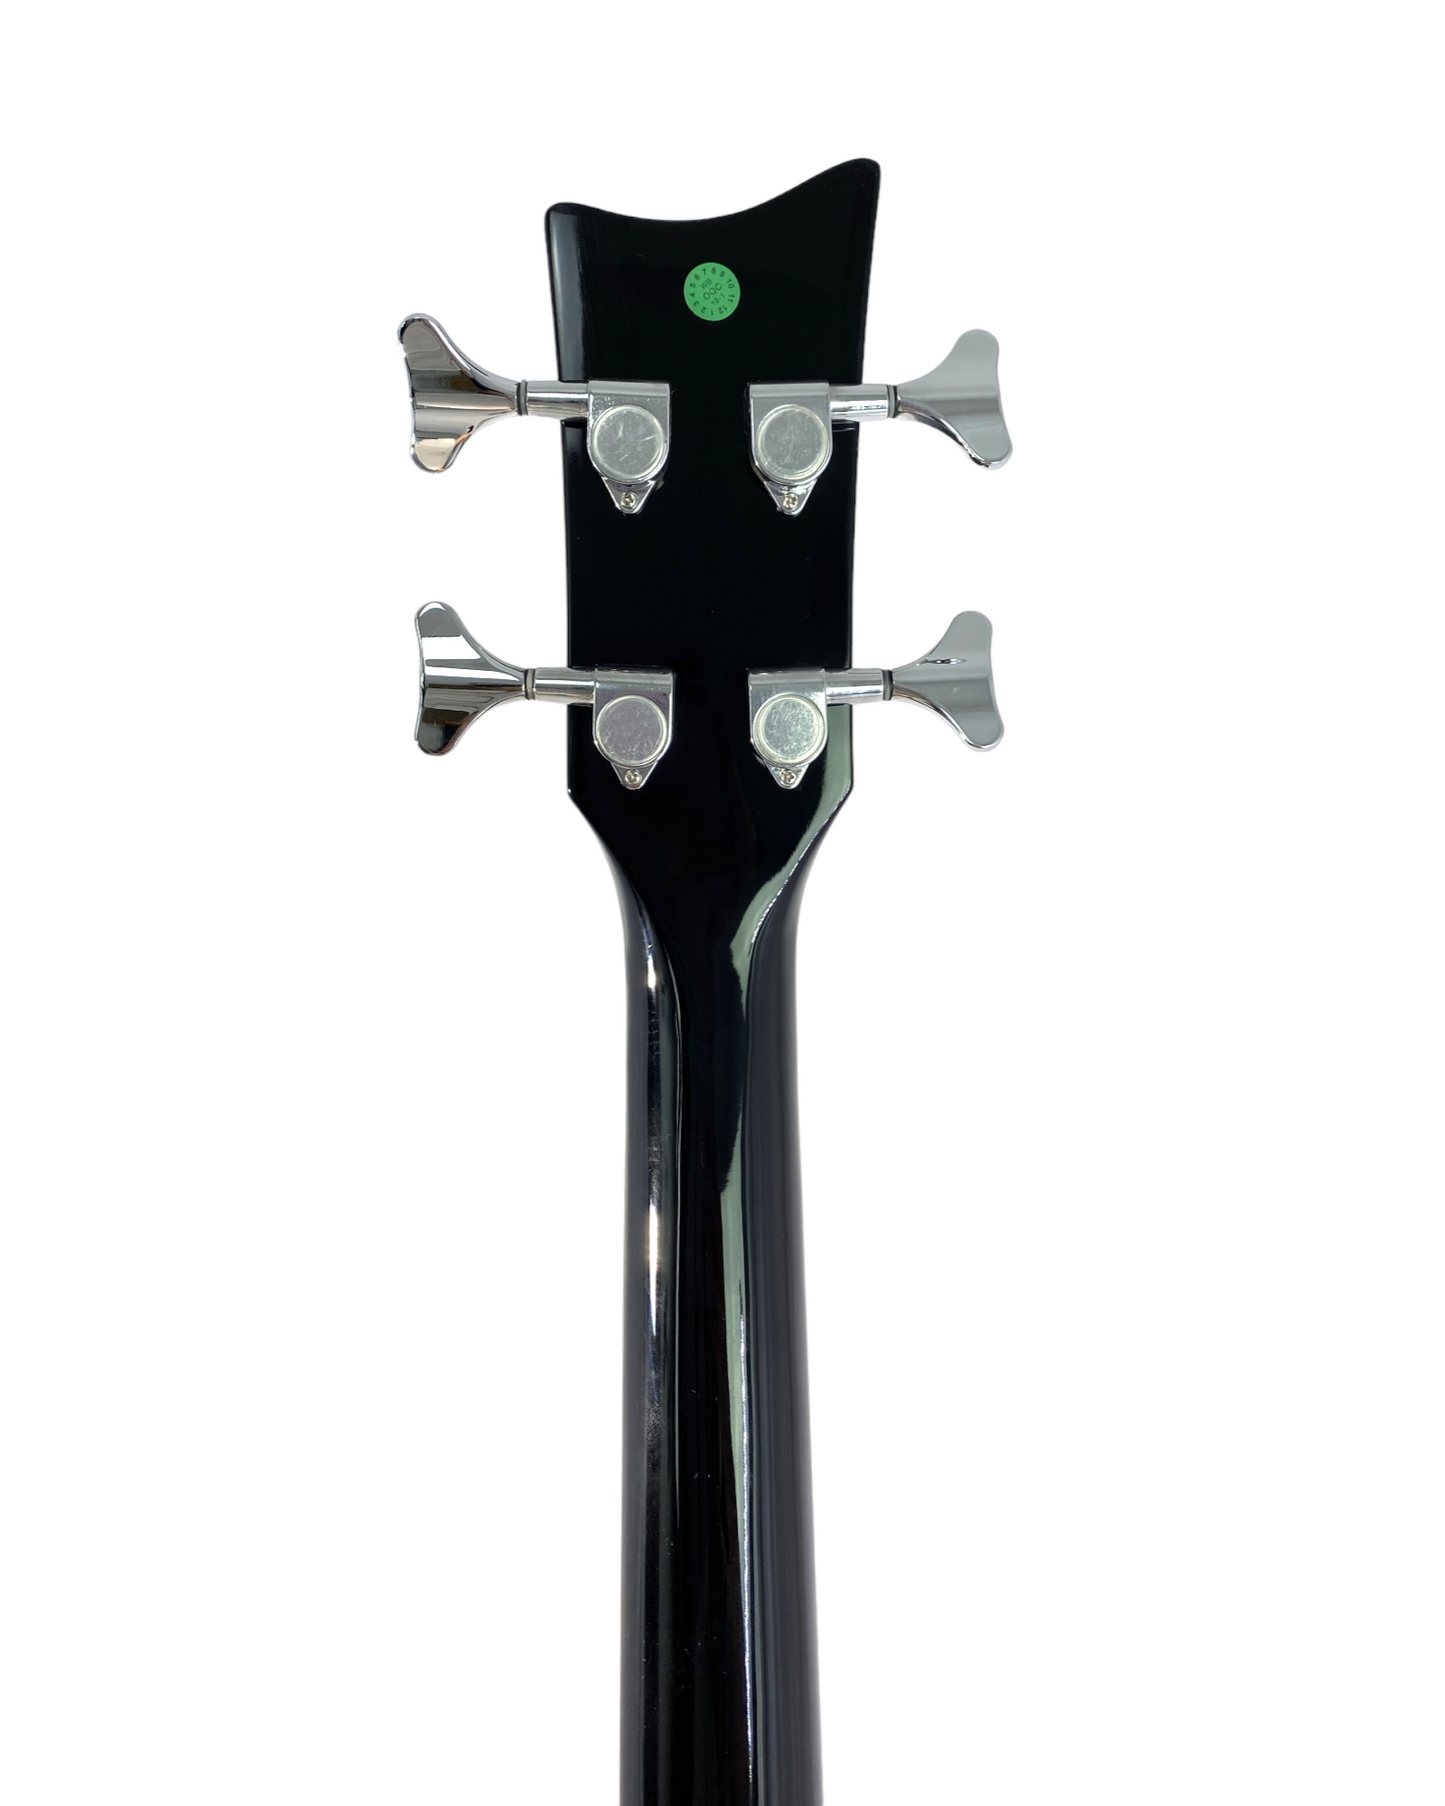 Haze full size FB711BCEQ 4-String Electric-Acoustic Bass Guitar Amp Stand Pack